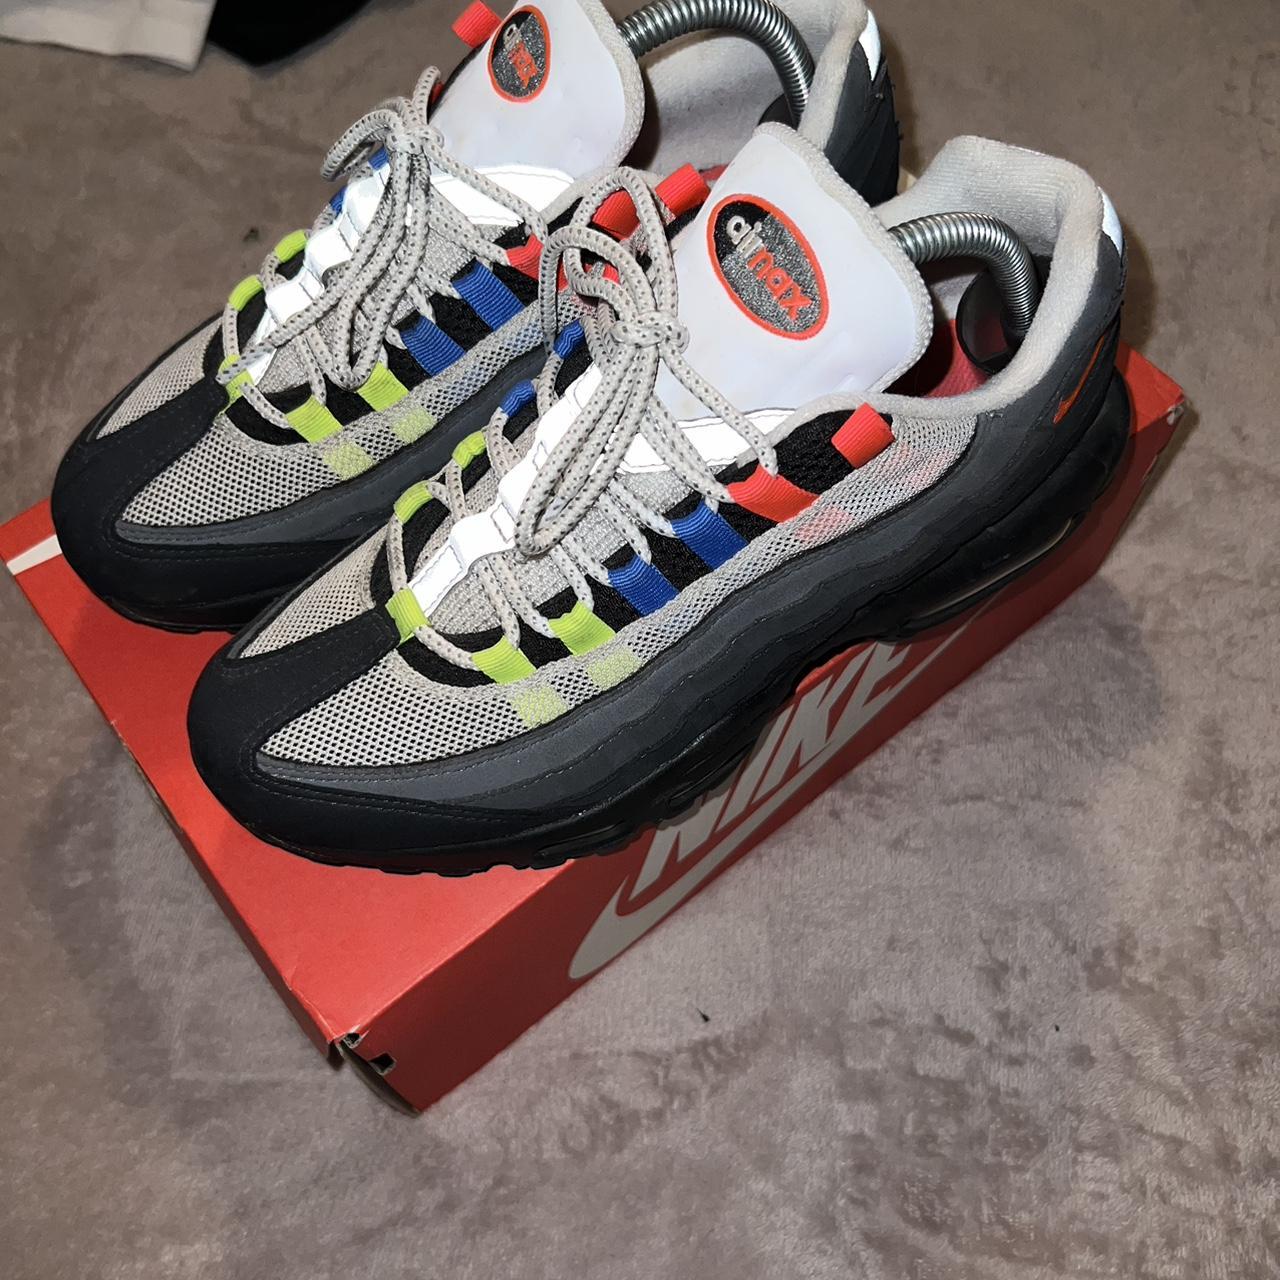 Nike air max 95 greedy 3.0 Good condition Size 6.5 - Depop